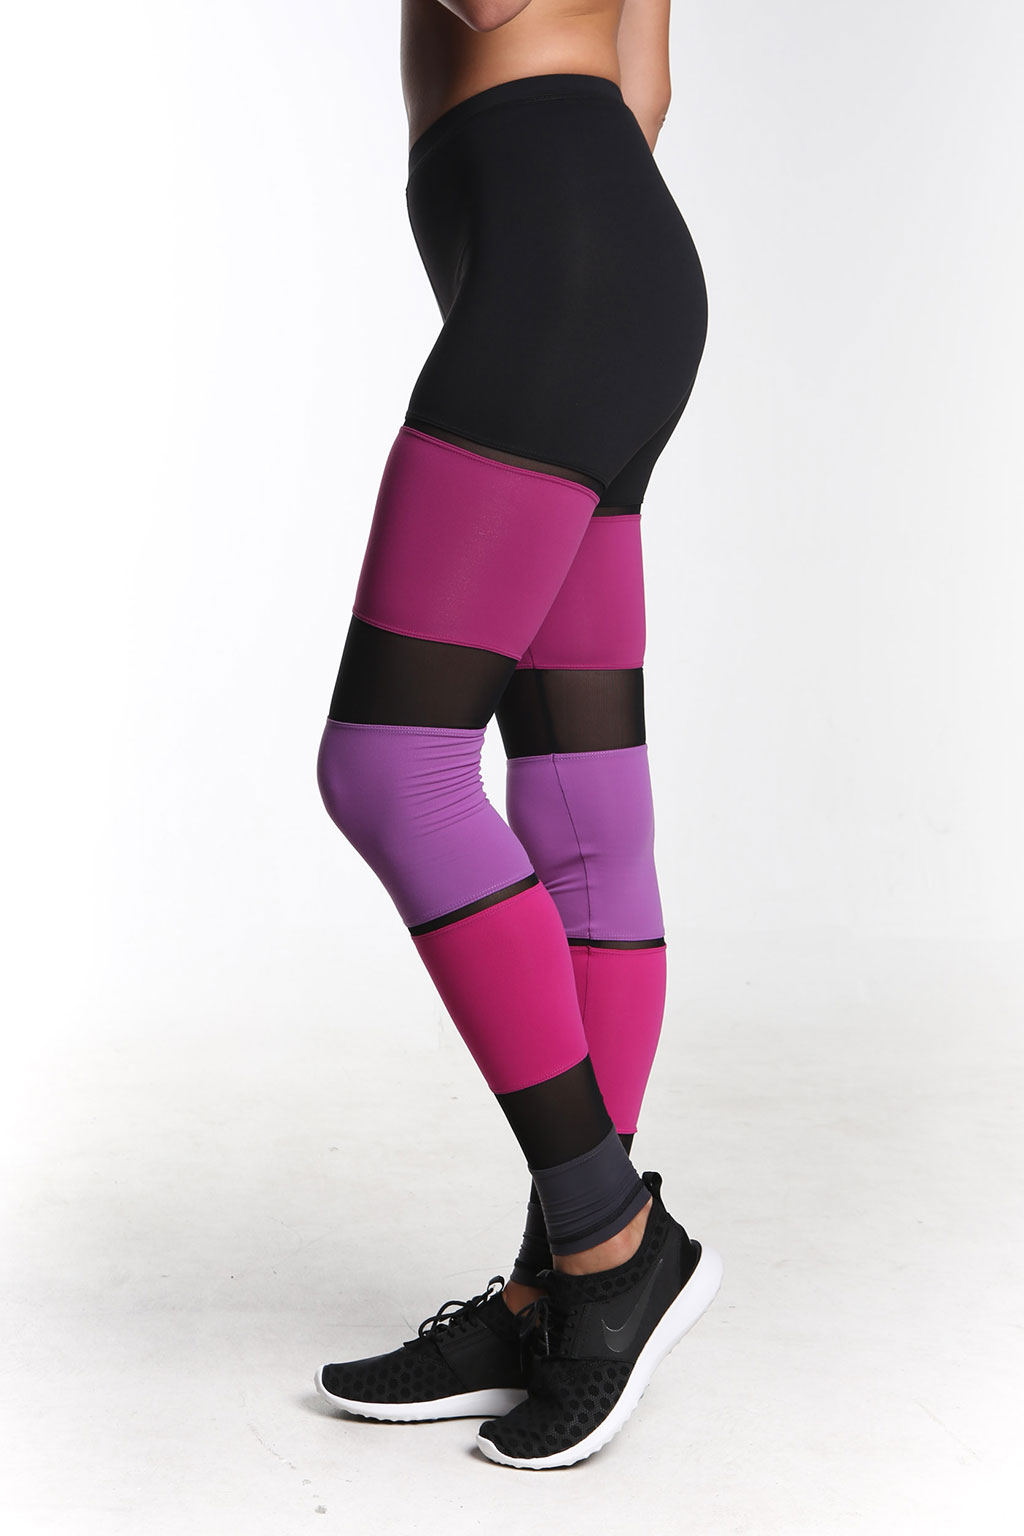 Peggy Moffitt Activewear Line Launches Its Debut Collection - Fashion ...